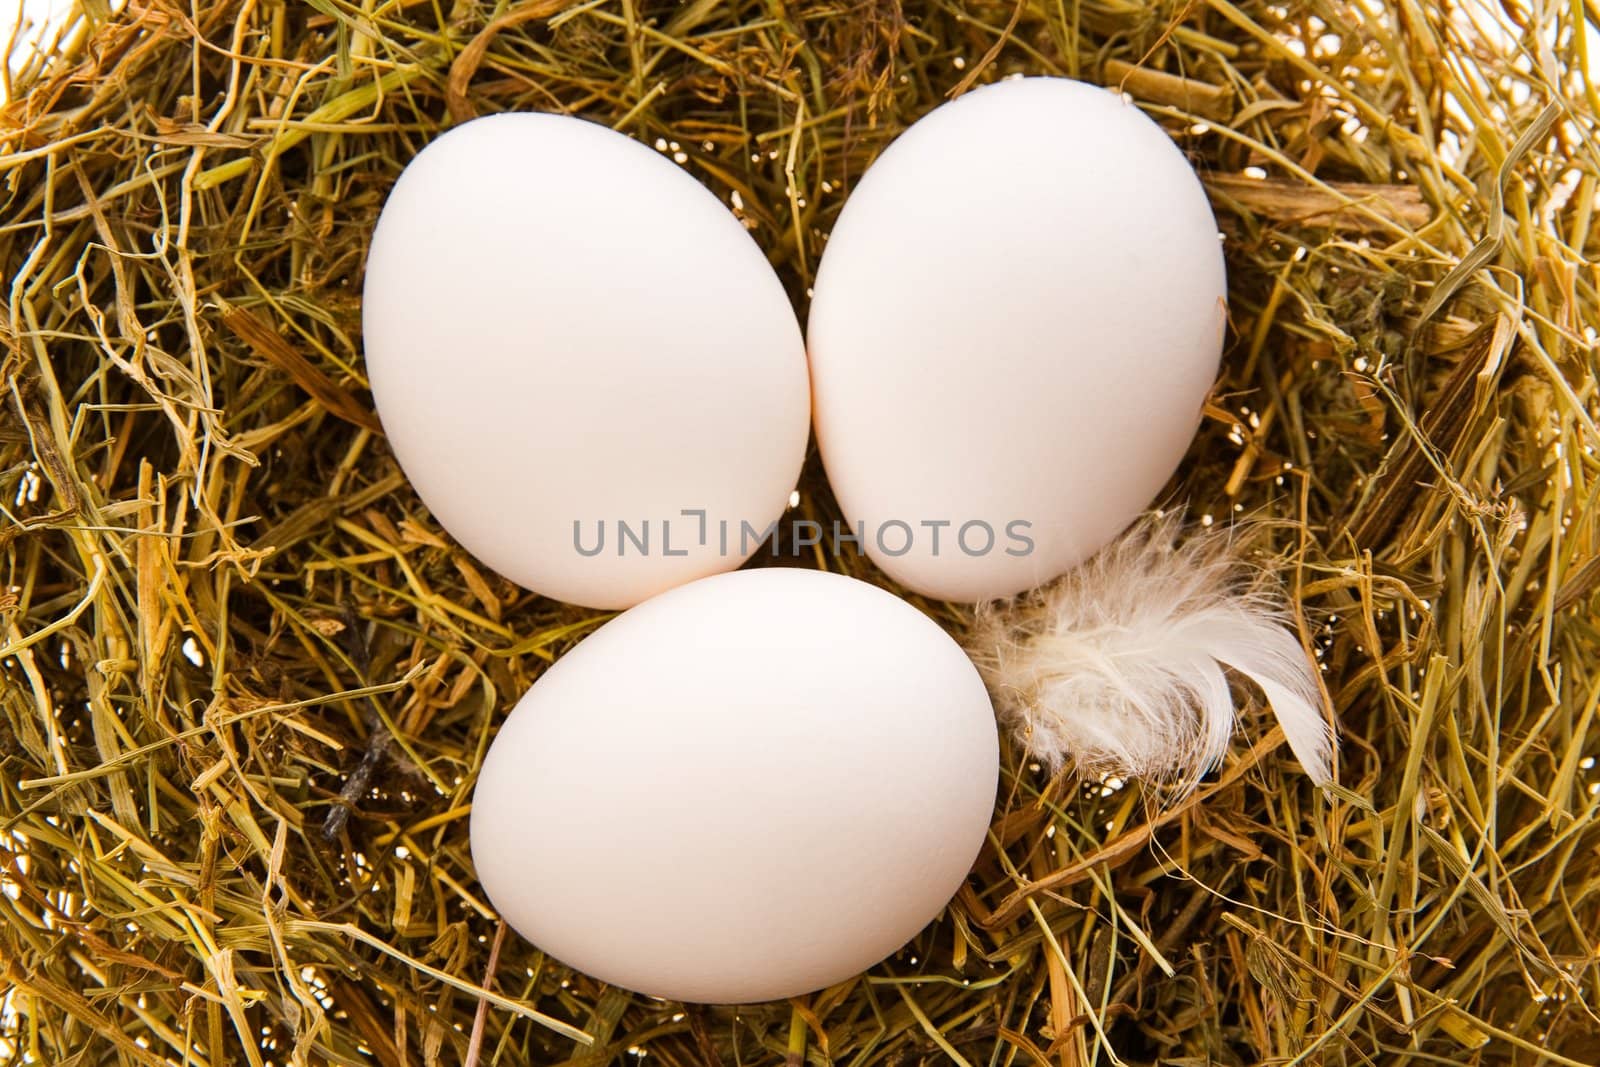 Three chicken white eggs in a nest from a dry grass close up

